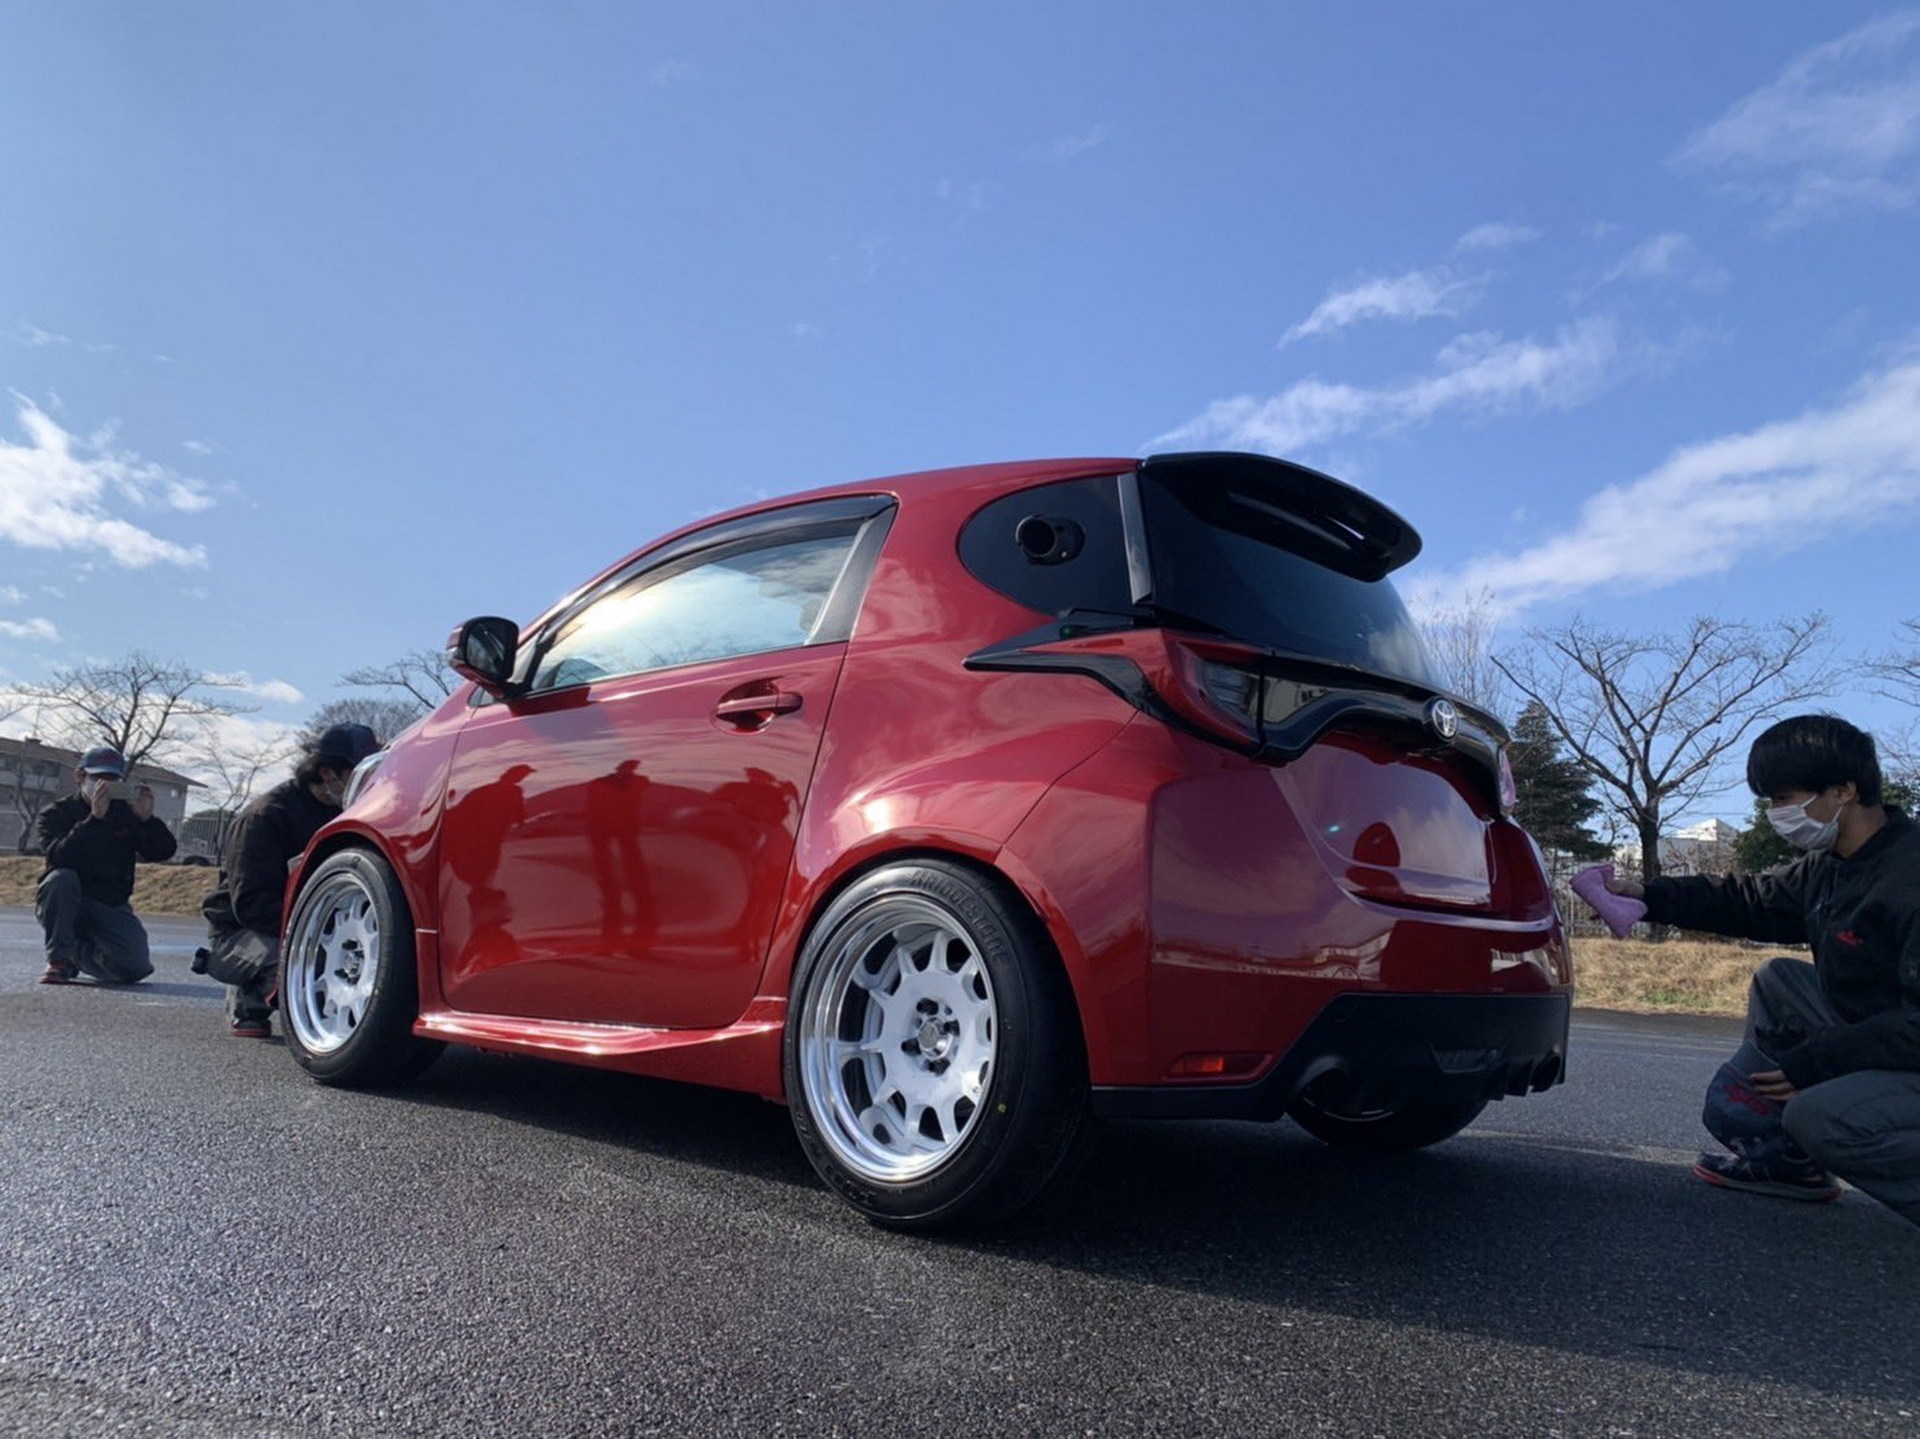 Toyota IQ Converted To A GR Yaris With A Kawasaki Engine | Carscoops